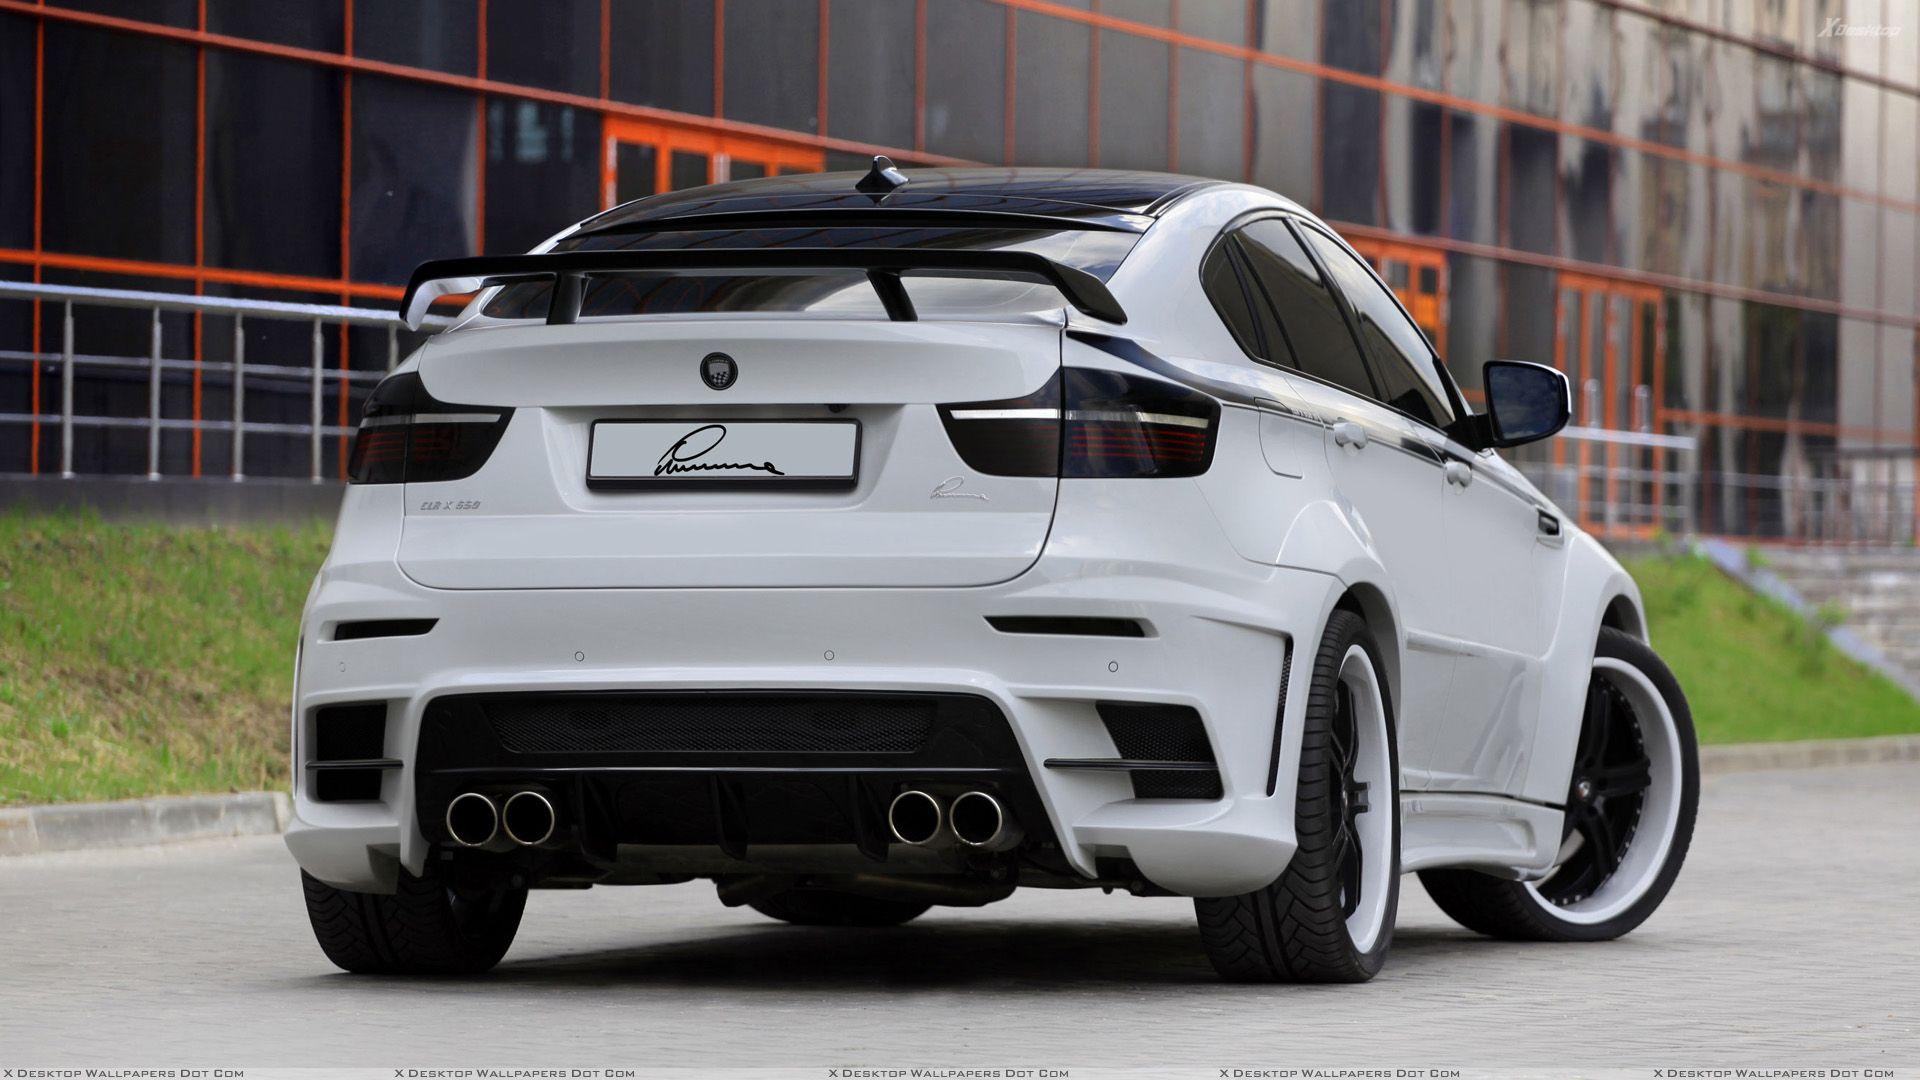 BMW X6 Wallpaper, Photo & Image in HD